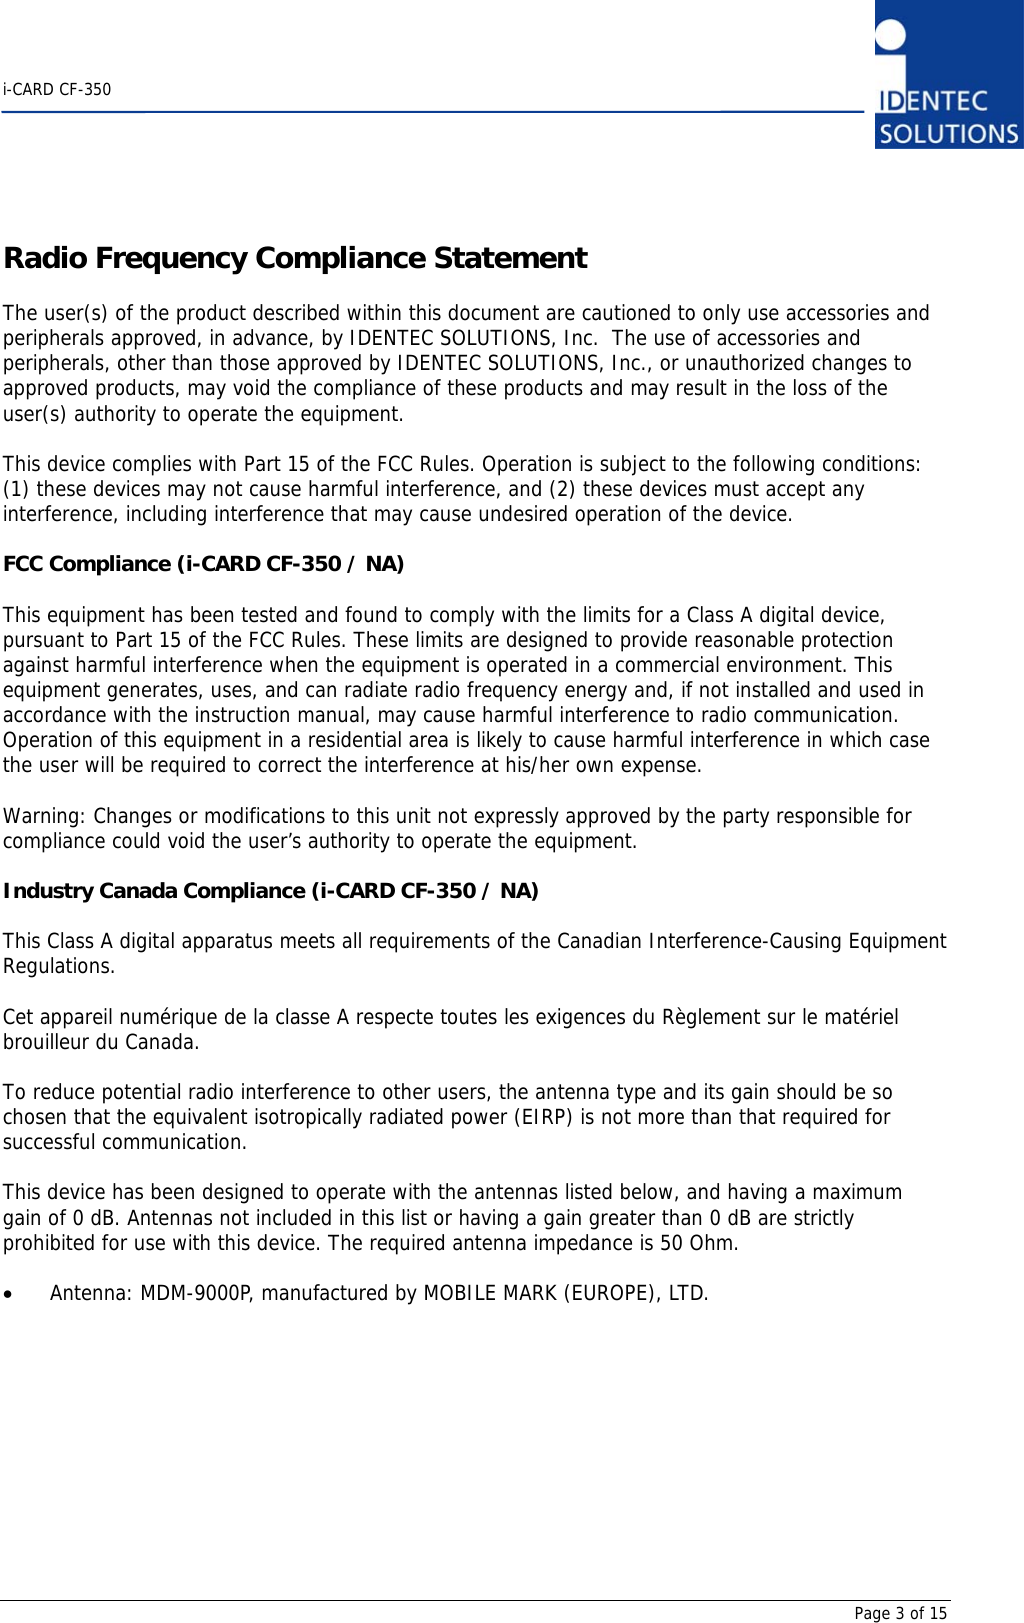    i-CARD CF-350       Page 3 of 15 Radio Frequency Compliance Statement  The user(s) of the product described within this document are cautioned to only use accessories and peripherals approved, in advance, by IDENTEC SOLUTIONS, Inc.  The use of accessories and peripherals, other than those approved by IDENTEC SOLUTIONS, Inc., or unauthorized changes to approved products, may void the compliance of these products and may result in the loss of the user(s) authority to operate the equipment.  This device complies with Part 15 of the FCC Rules. Operation is subject to the following conditions: (1) these devices may not cause harmful interference, and (2) these devices must accept any interference, including interference that may cause undesired operation of the device.  FCC Compliance (i-CARD CF-350 / NA)  This equipment has been tested and found to comply with the limits for a Class A digital device, pursuant to Part 15 of the FCC Rules. These limits are designed to provide reasonable protection against harmful interference when the equipment is operated in a commercial environment. This equipment generates, uses, and can radiate radio frequency energy and, if not installed and used in accordance with the instruction manual, may cause harmful interference to radio communication. Operation of this equipment in a residential area is likely to cause harmful interference in which case the user will be required to correct the interference at his/her own expense.  Warning: Changes or modifications to this unit not expressly approved by the party responsible for compliance could void the user’s authority to operate the equipment.  Industry Canada Compliance (i-CARD CF-350 / NA)  This Class A digital apparatus meets all requirements of the Canadian Interference-Causing Equipment Regulations.  Cet appareil numérique de la classe A respecte toutes les exigences du Règlement sur le matériel brouilleur du Canada.  To reduce potential radio interference to other users, the antenna type and its gain should be so chosen that the equivalent isotropically radiated power (EIRP) is not more than that required for successful communication.  This device has been designed to operate with the antennas listed below, and having a maximum gain of 0 dB. Antennas not included in this list or having a gain greater than 0 dB are strictly prohibited for use with this device. The required antenna impedance is 50 Ohm.  • Antenna: MDM-9000P, manufactured by MOBILE MARK (EUROPE), LTD.           